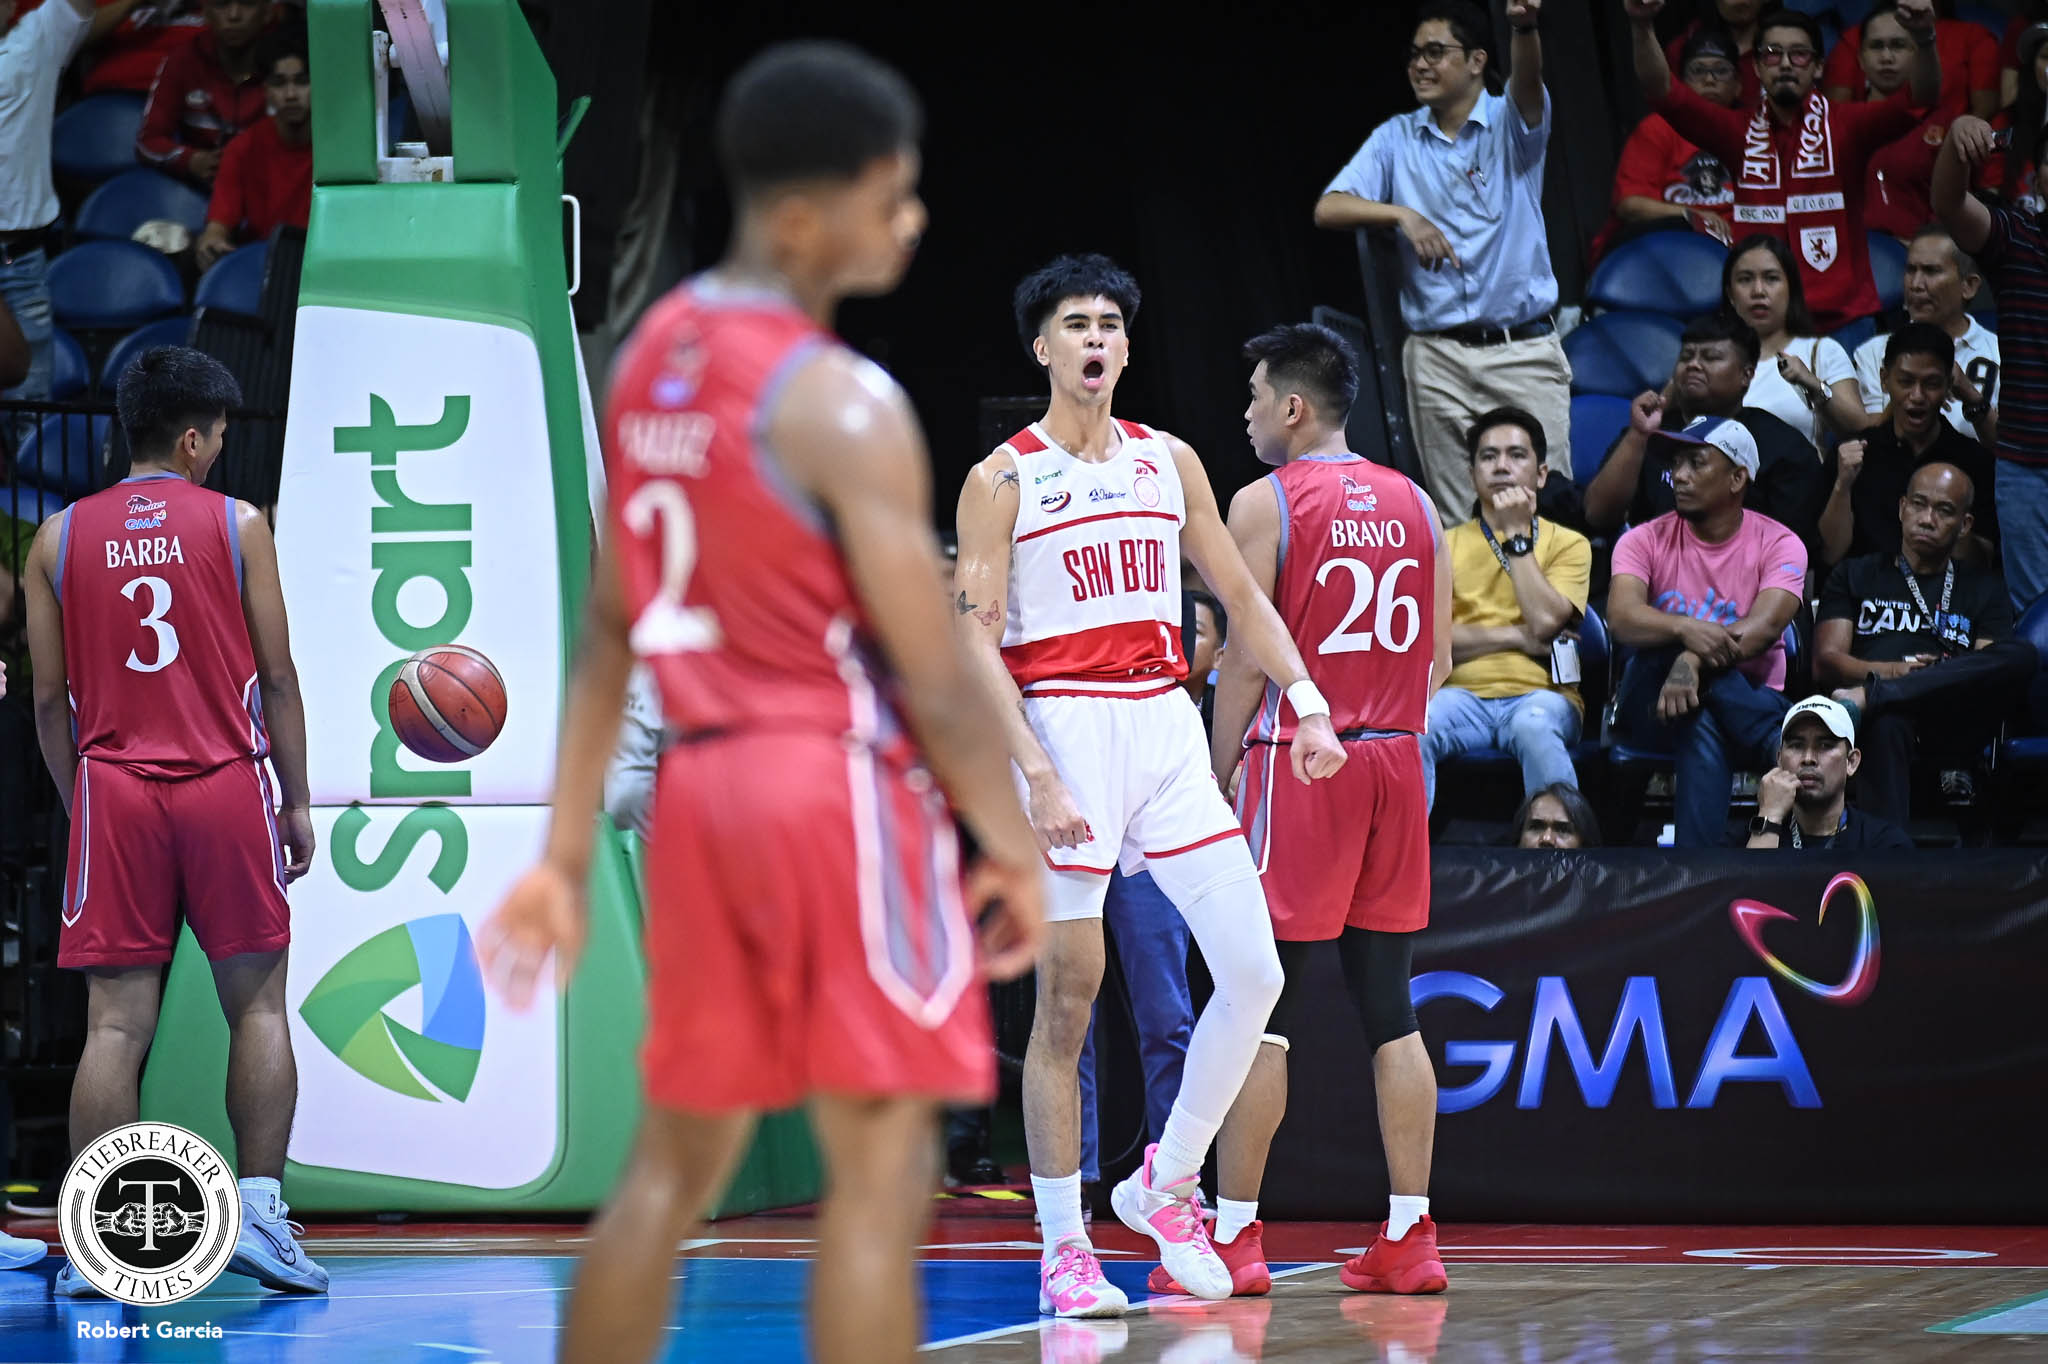 NCAA-99-F4-SBU-vs.-LPU-Jomel-Puno-2 Rise of Nygel Gonzales, Jomel Puno proves that Red Lions 1 to 18 can deliver Basketball NCAA News SBC  - philippine sports news